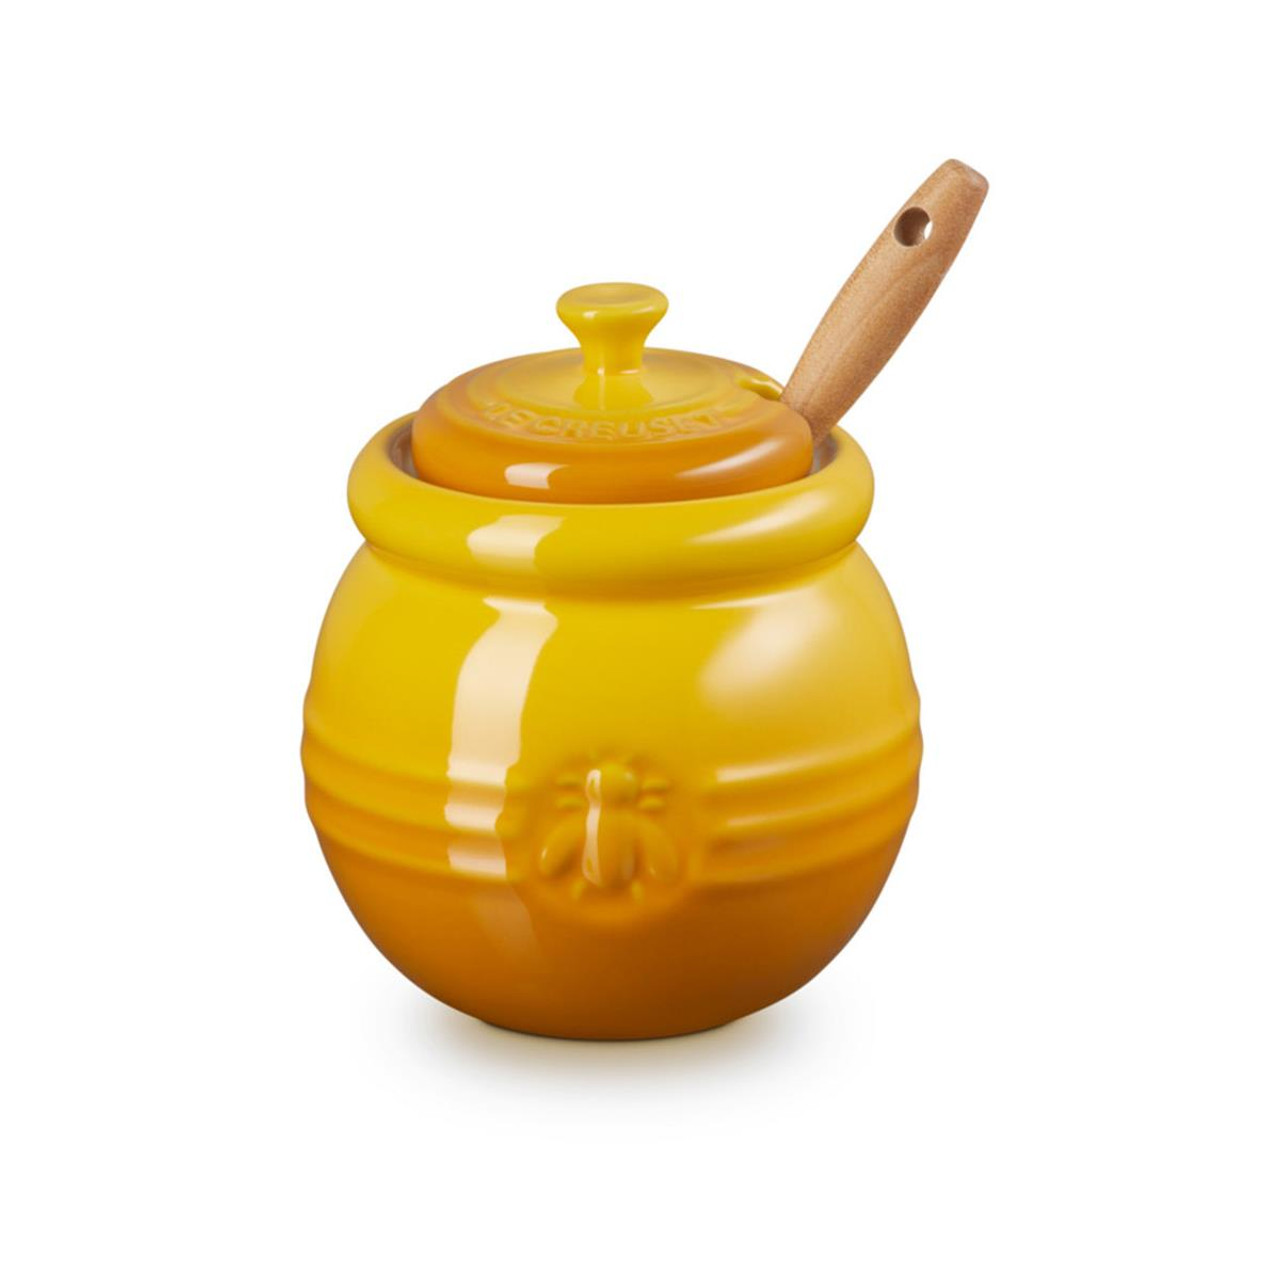 Is the Le Creuset honey pot available in other colors?